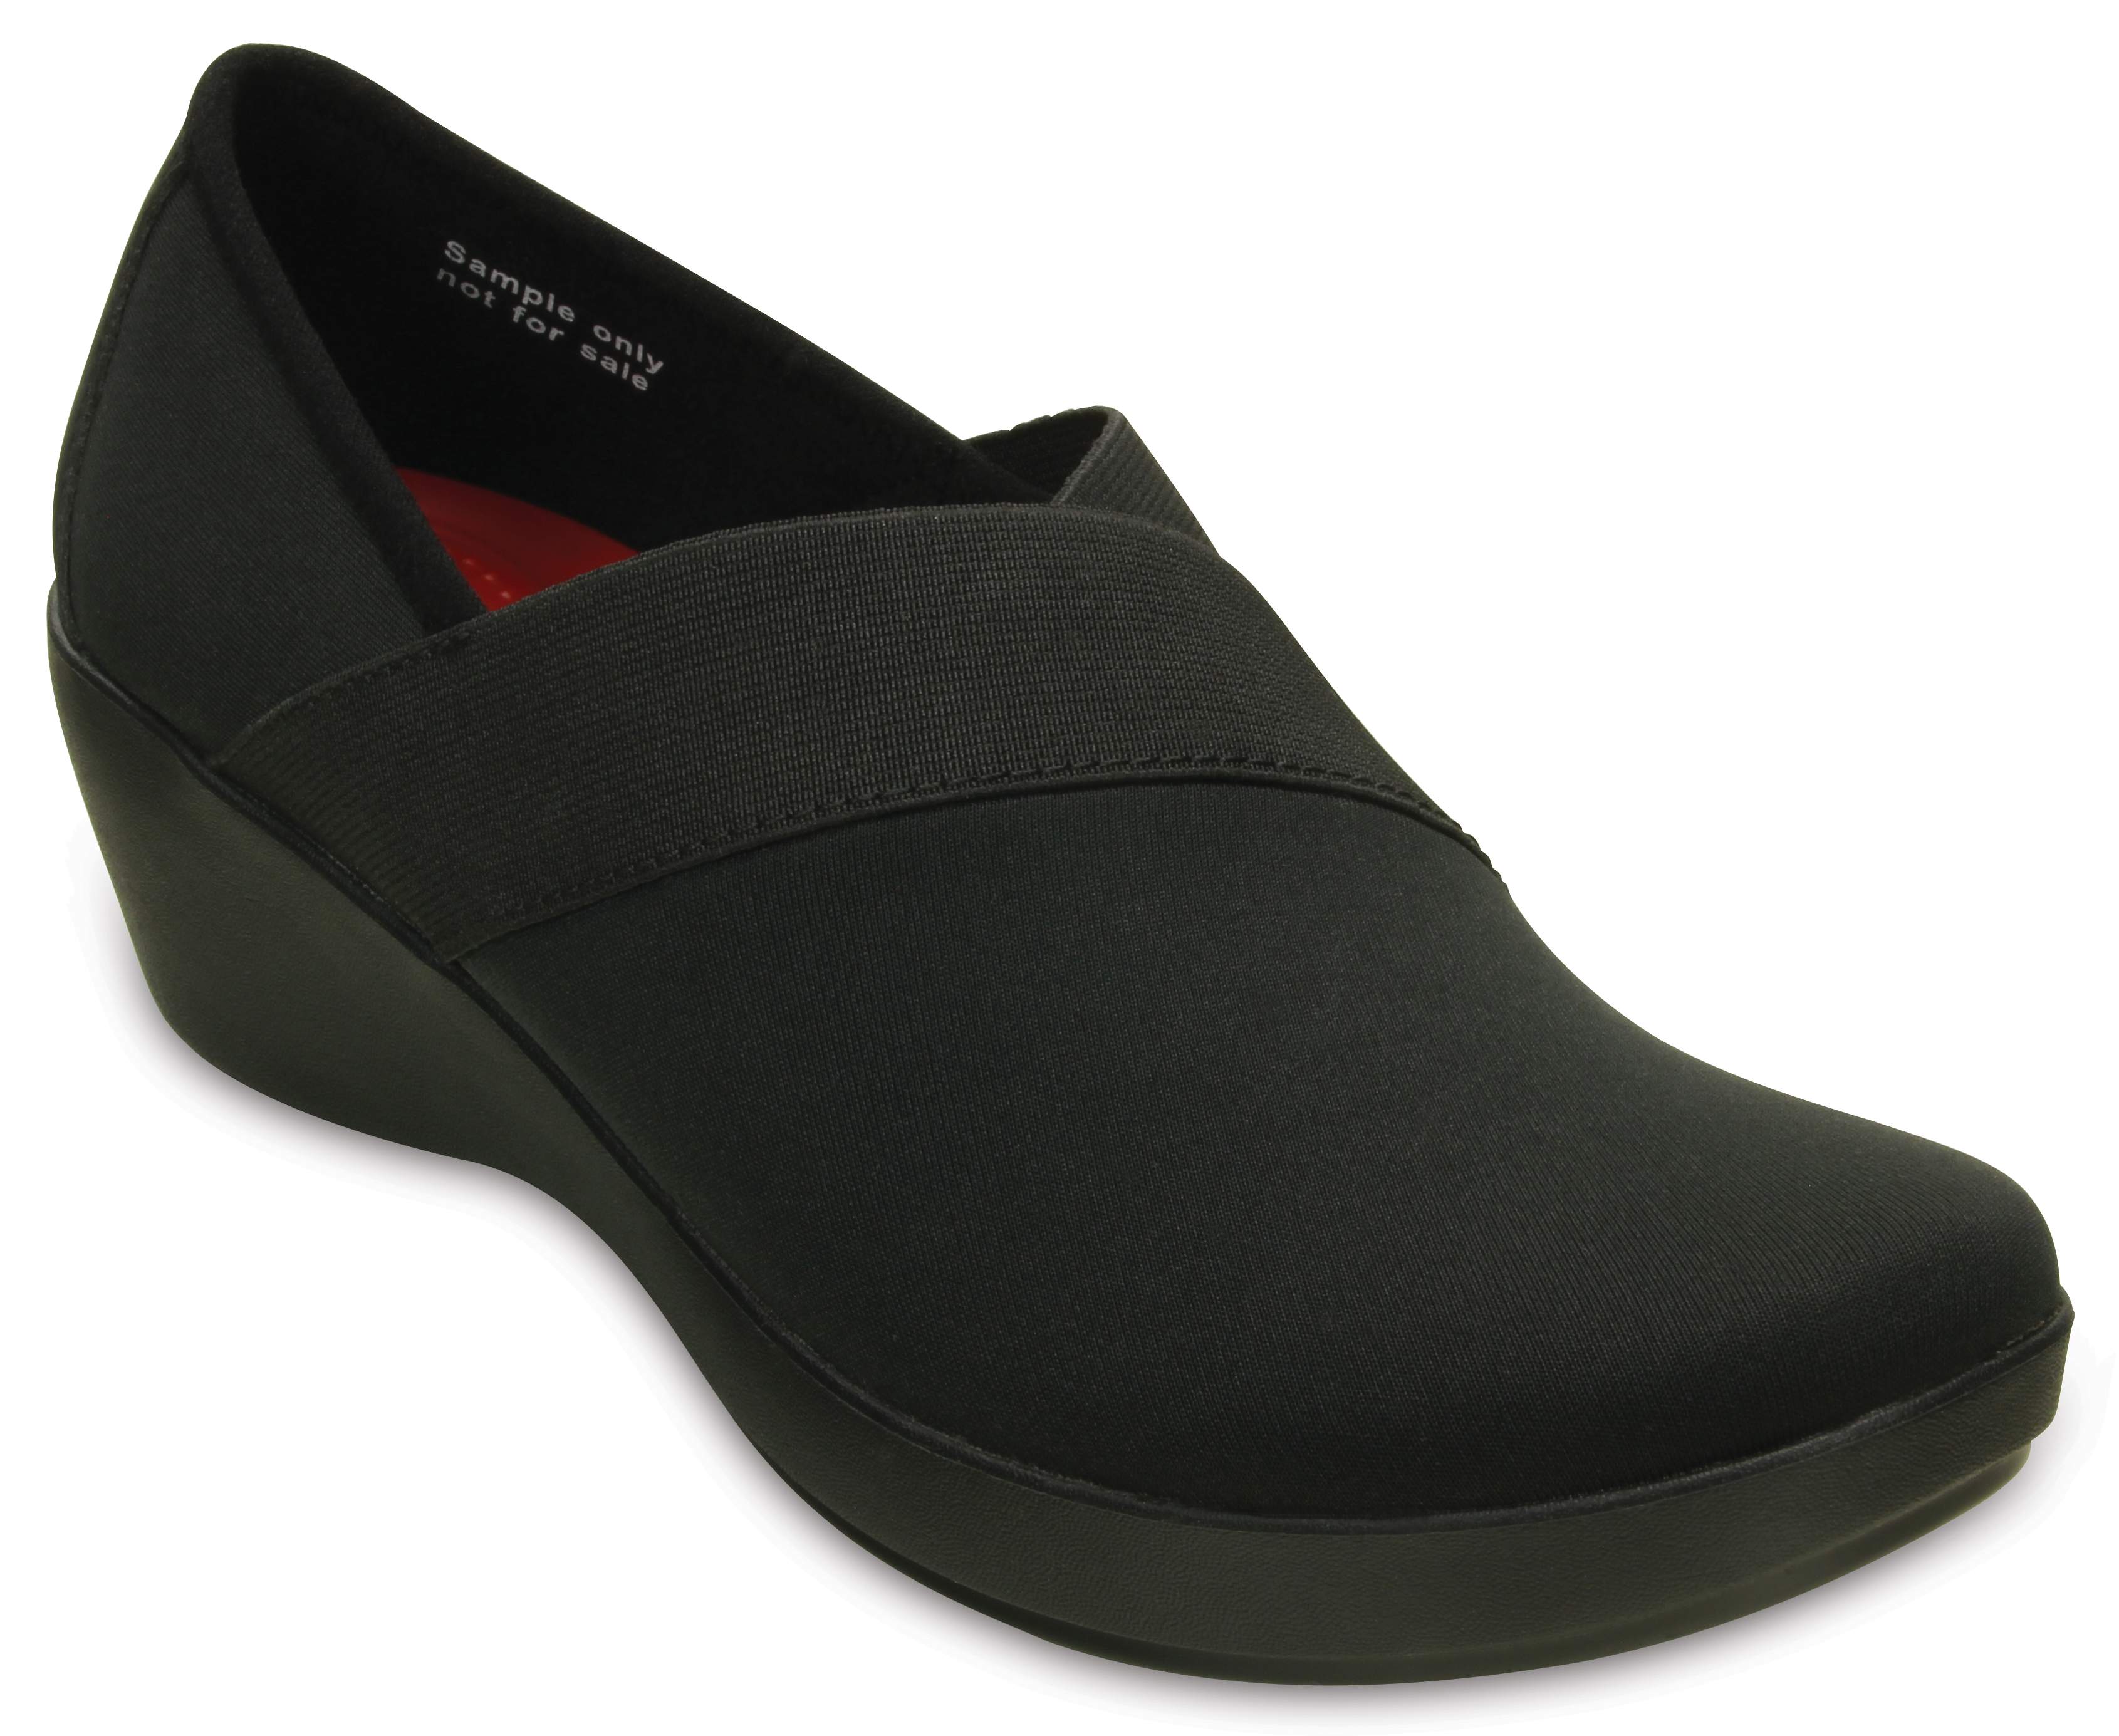 crocs busy day wedge